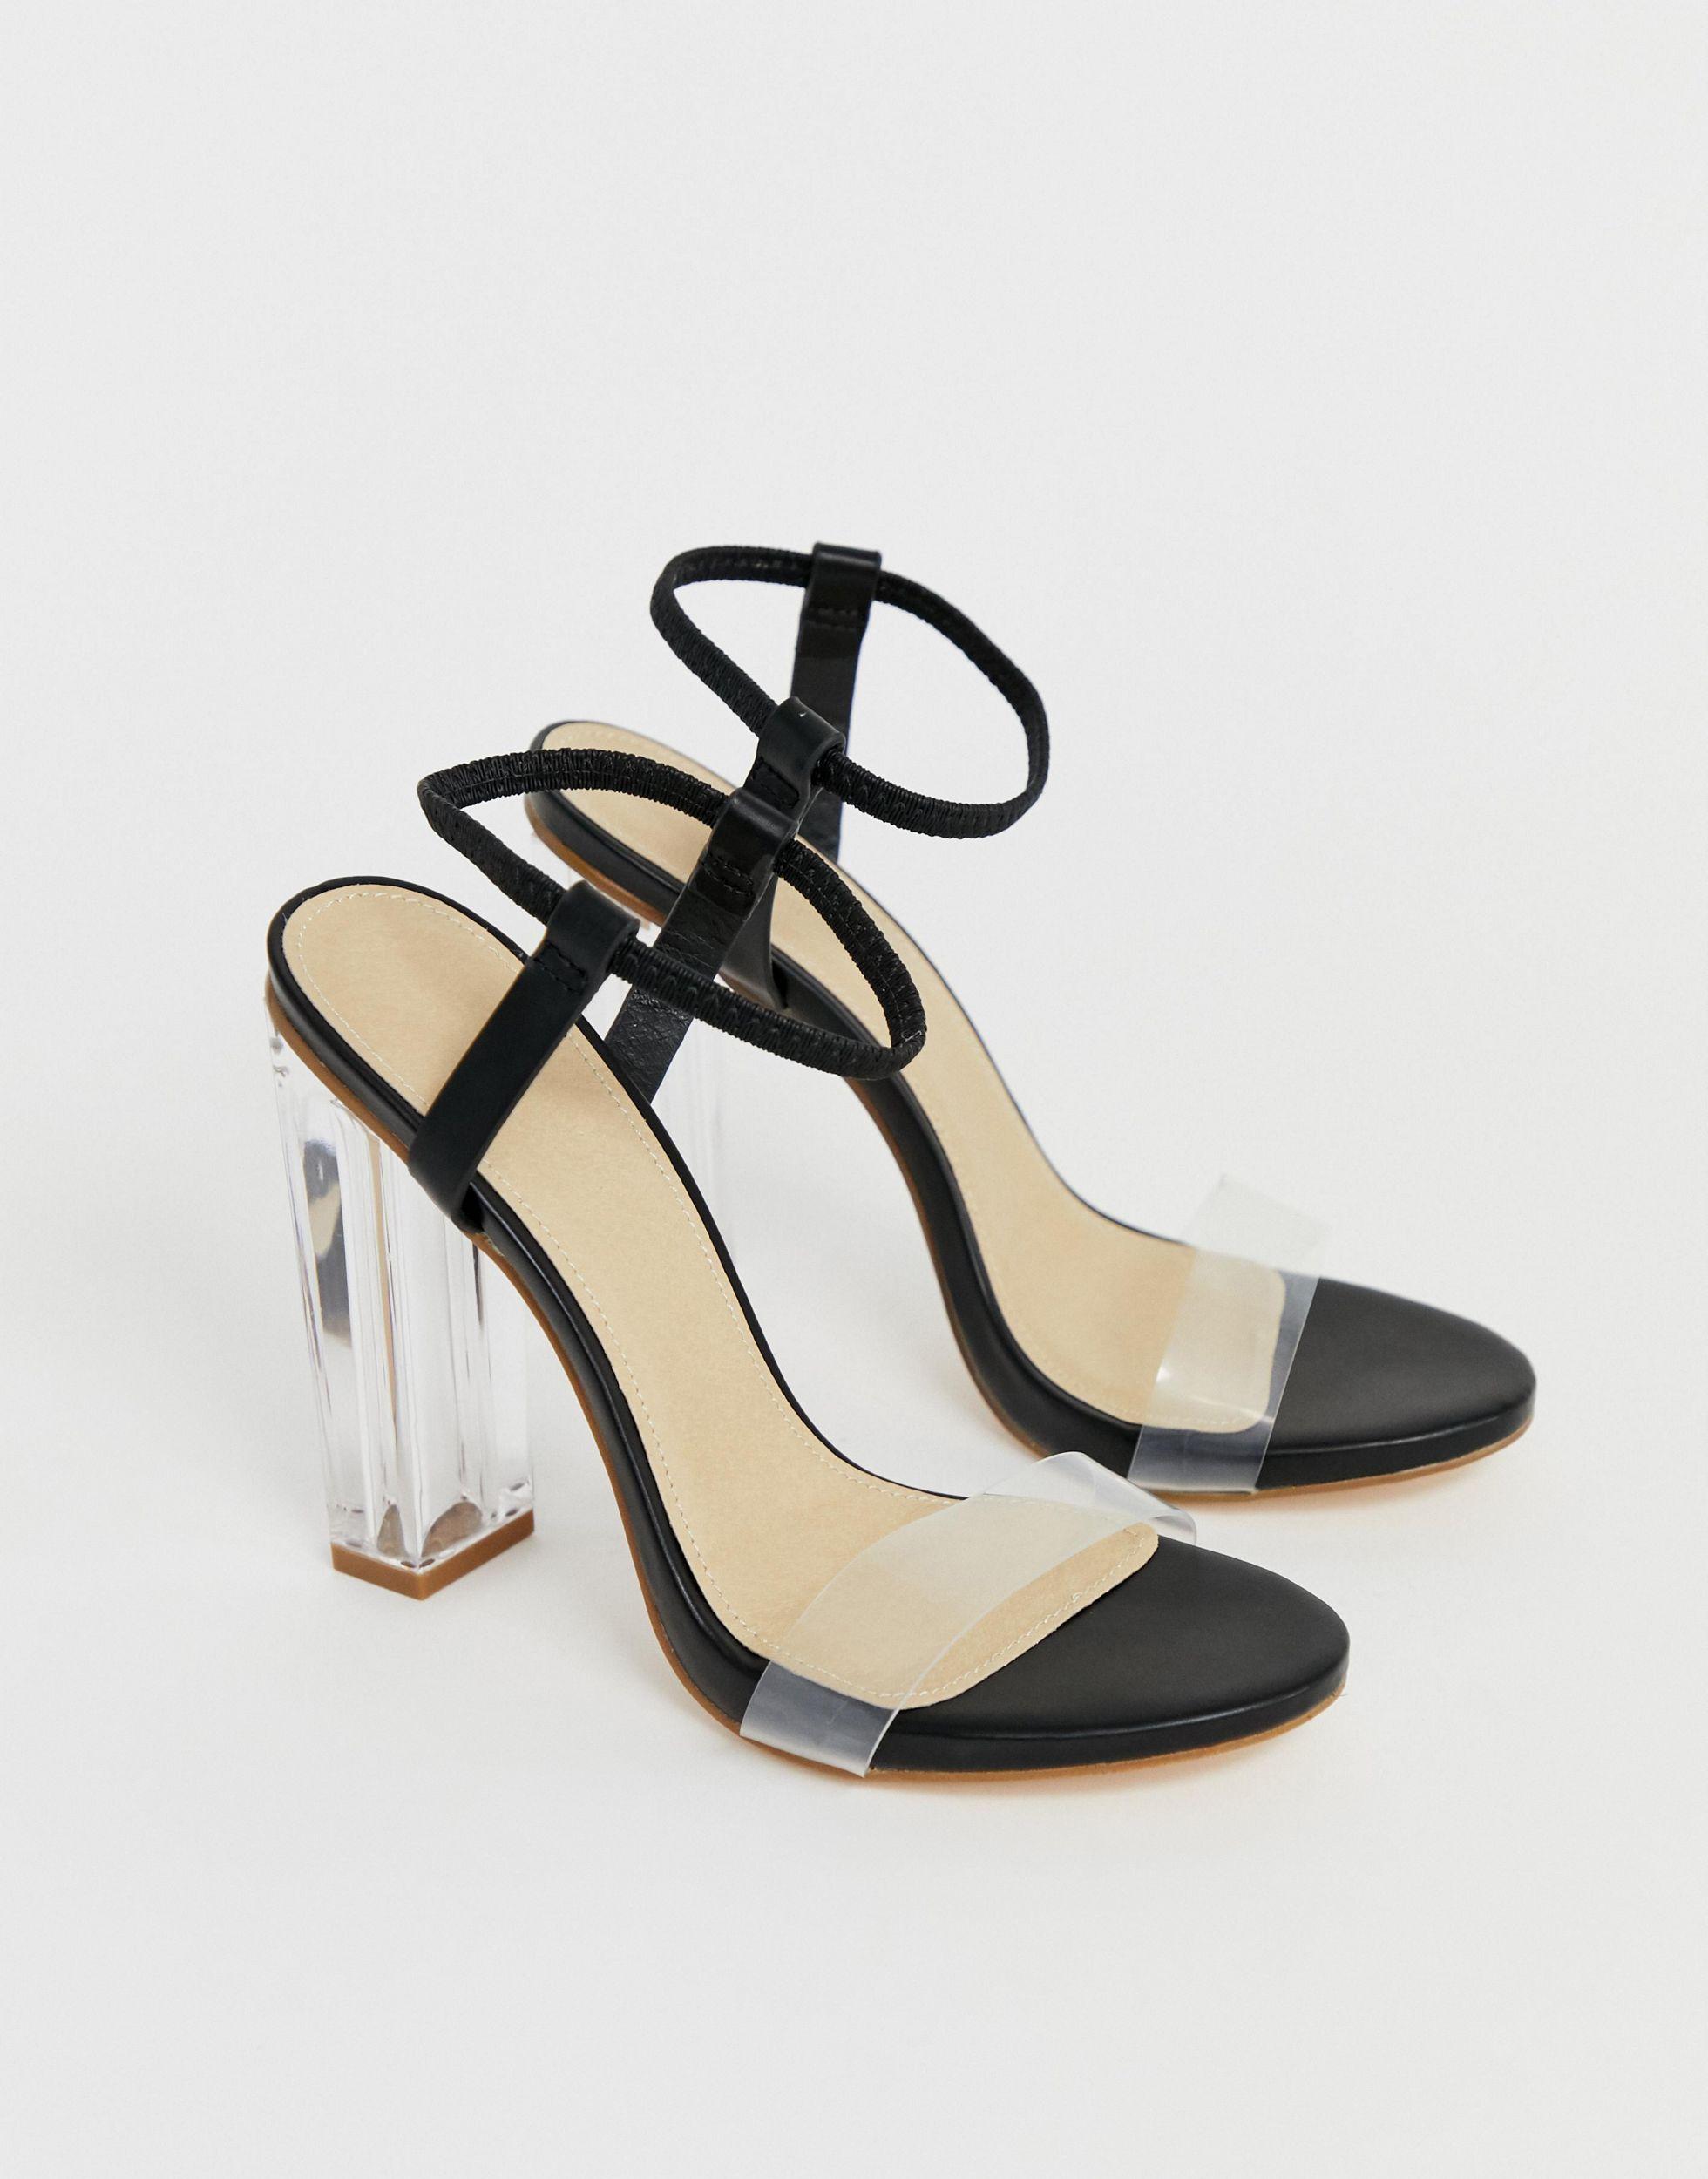 Nude Block Heel With Ankle Tie | Truffle Collection | SilkFred US